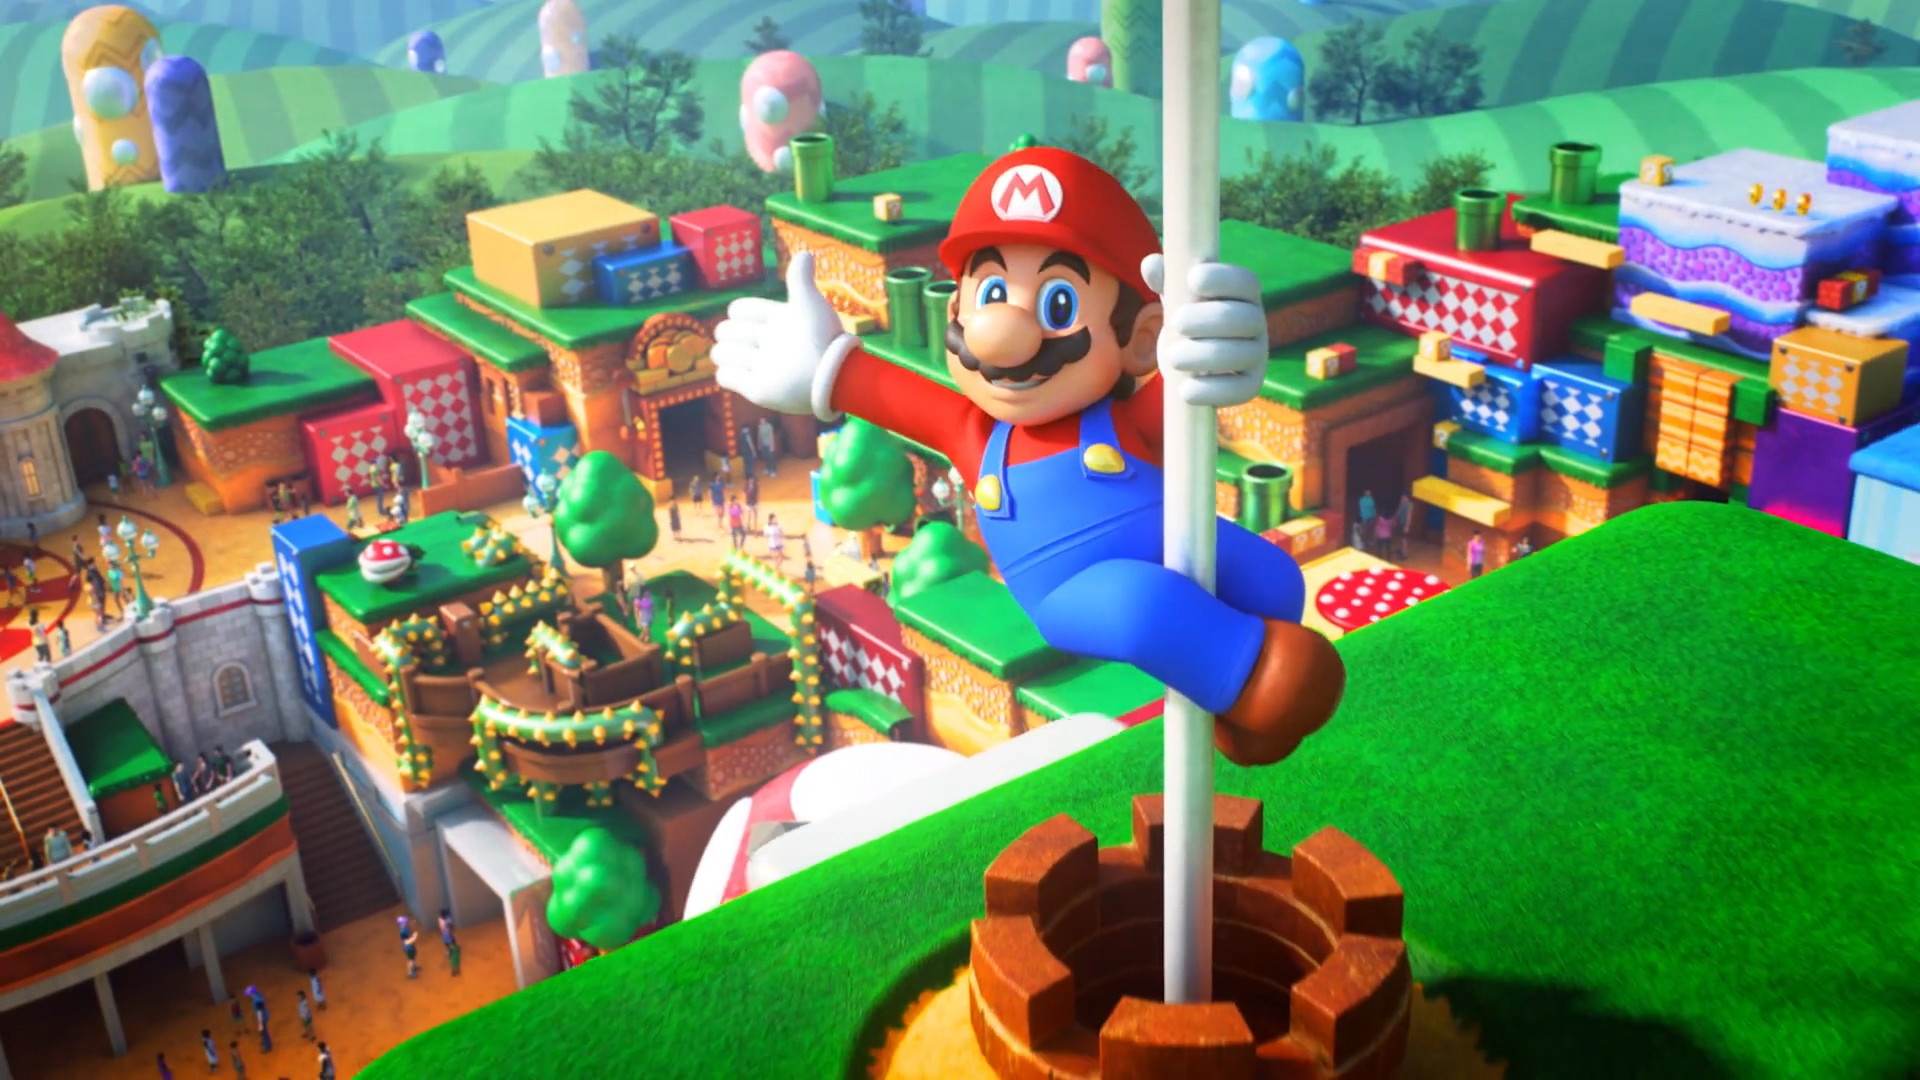 Super Nintendo World will open at Universal Studios in Osaka, Japan within March